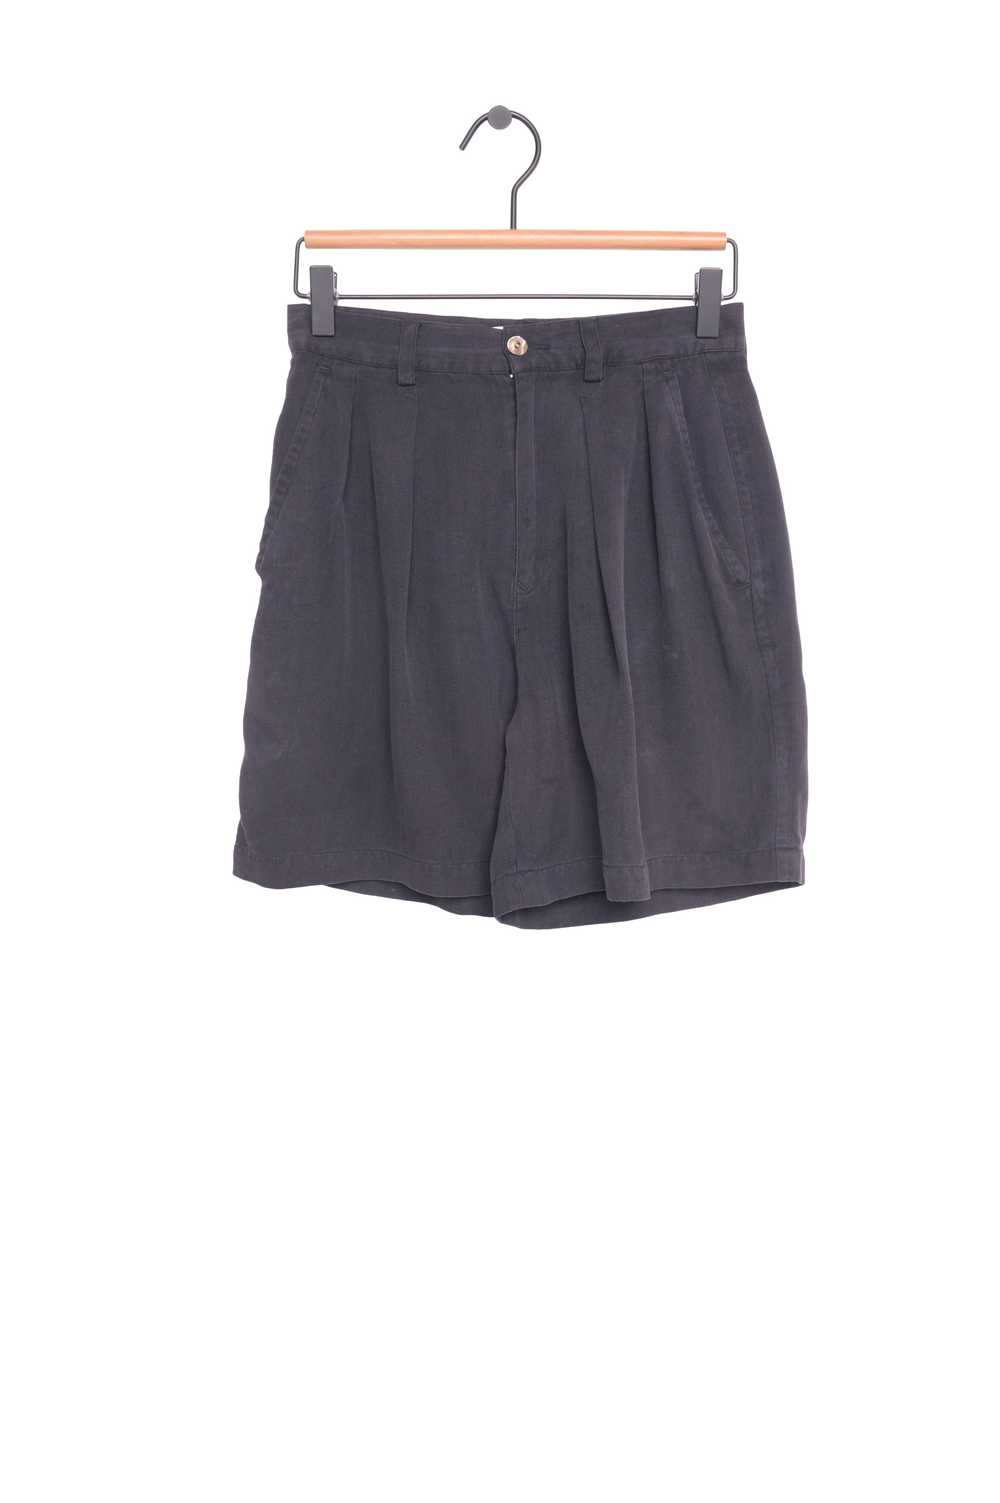 1980s Silk Pleated Trouser Shorts - image 1